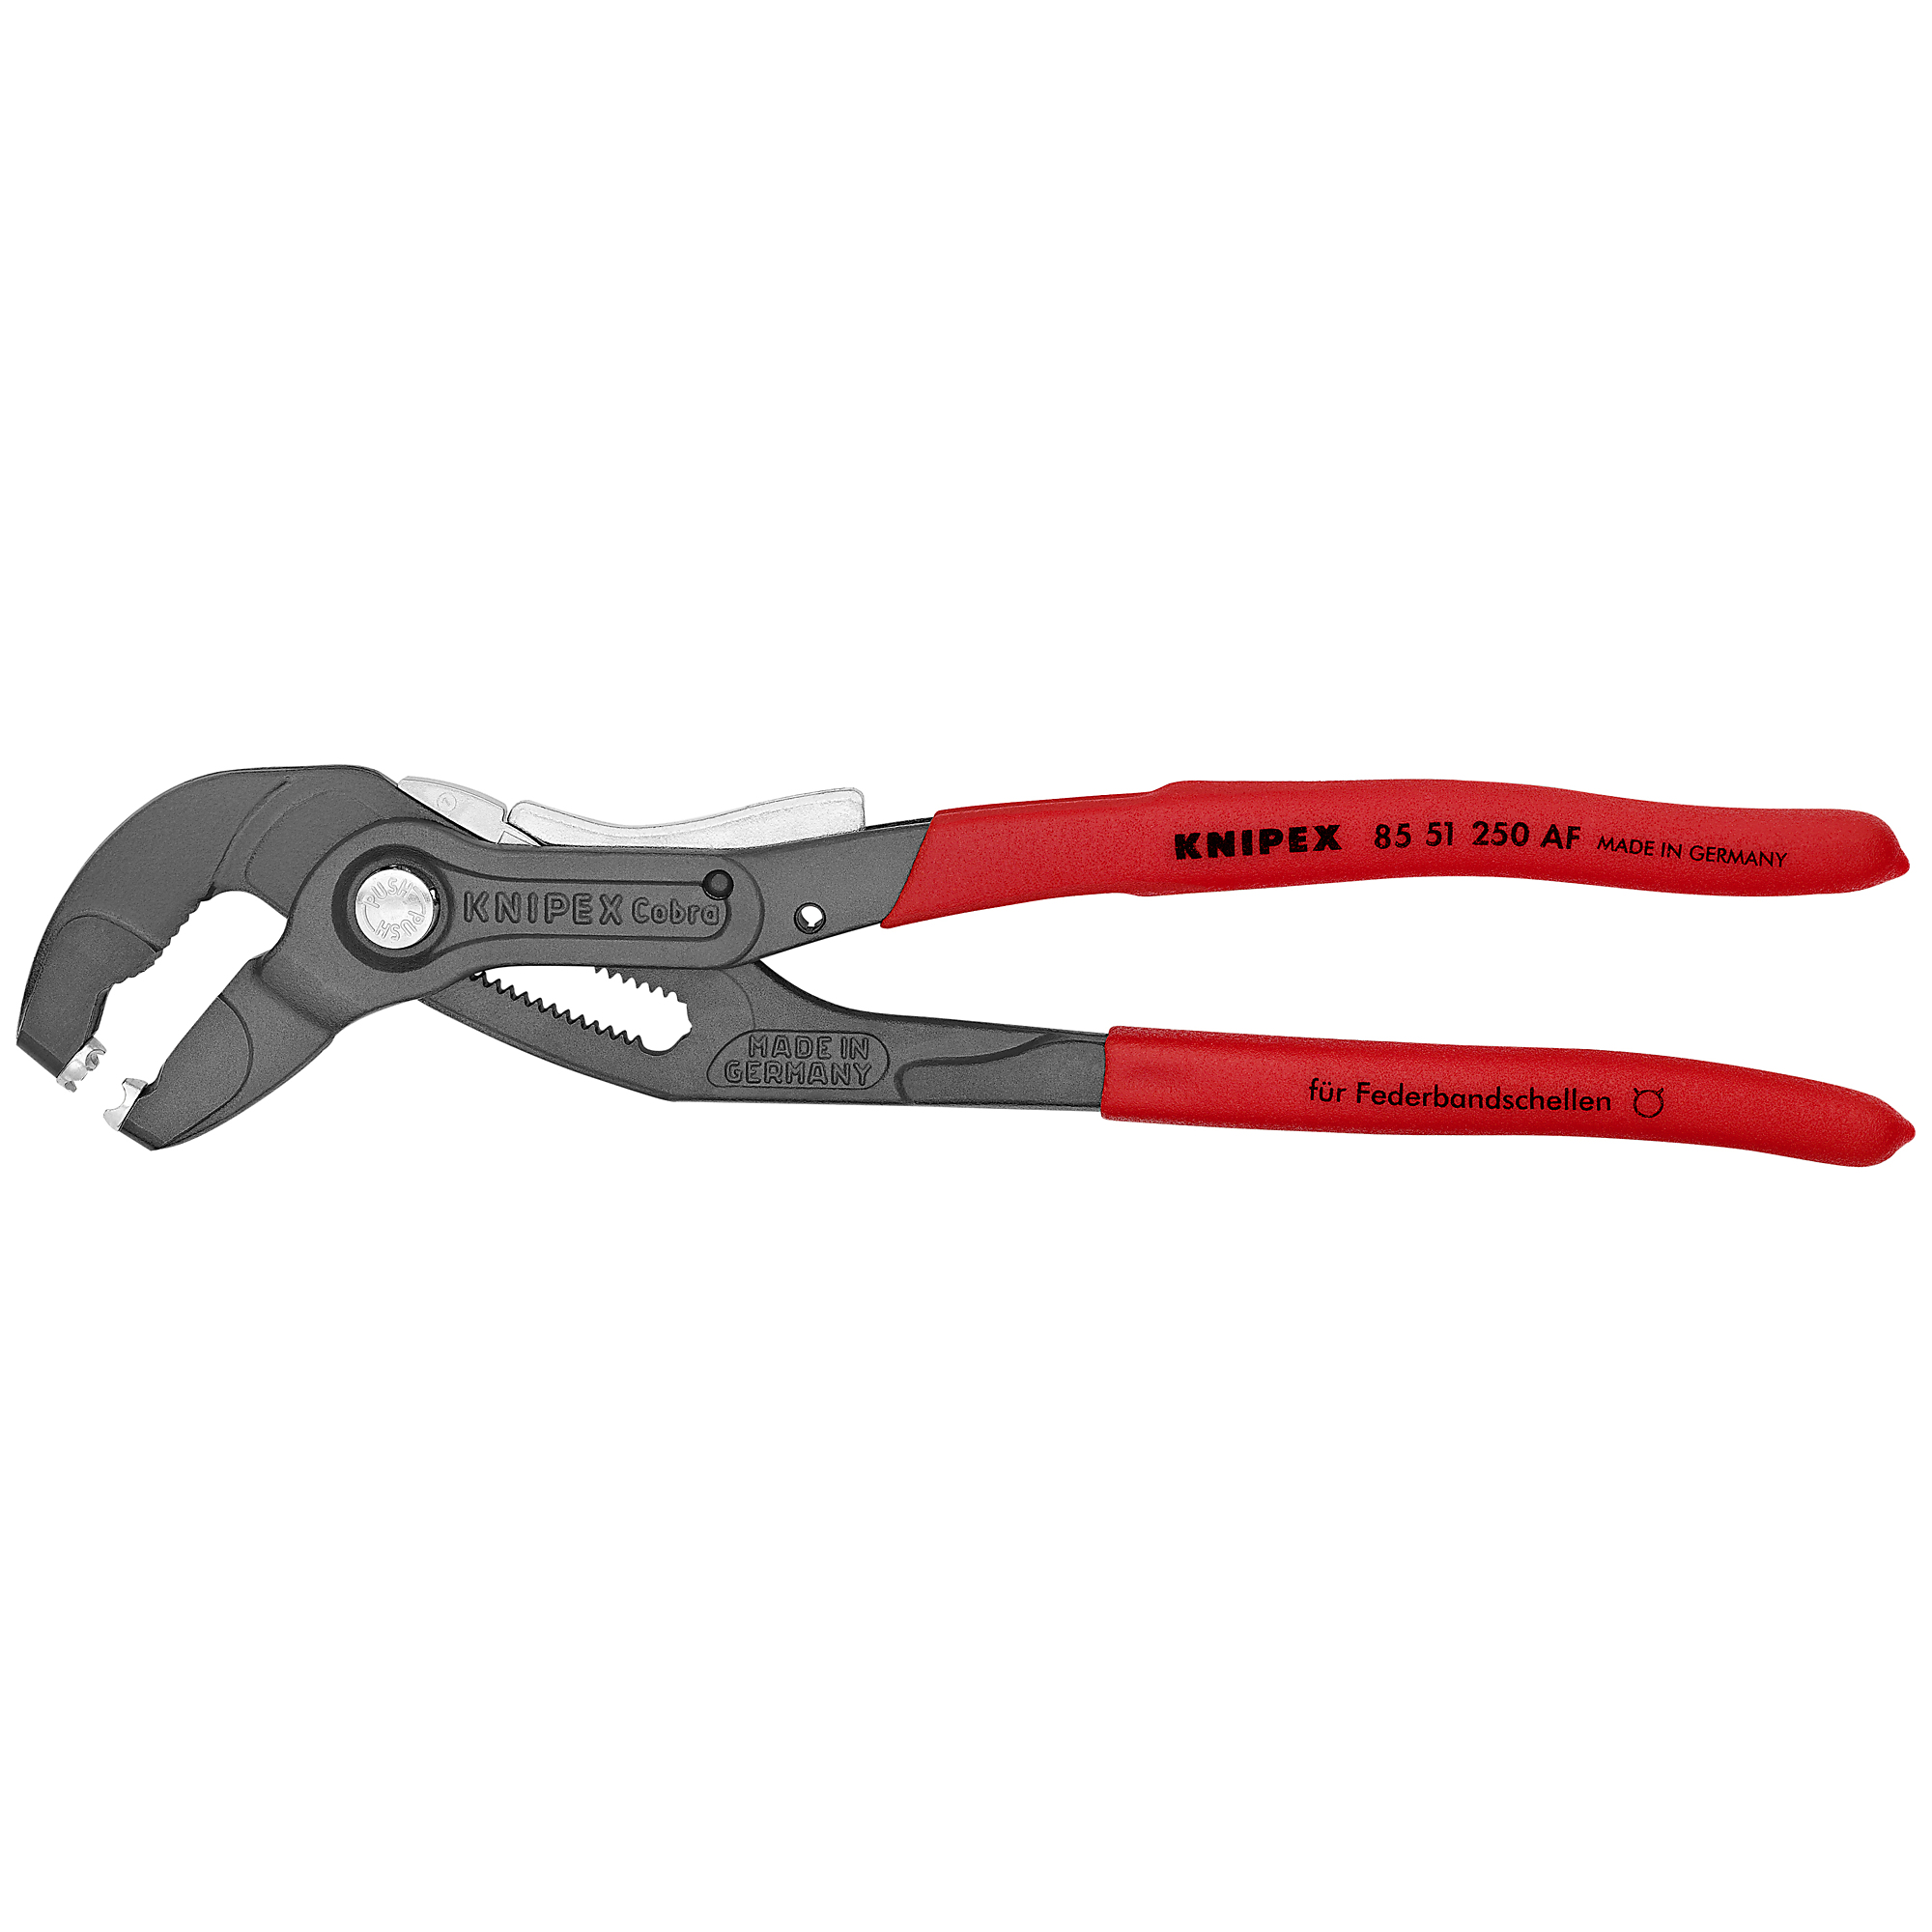 KNIPEX, Spring Hose Clamp Pliers-Locking Device, Bulk,10Inch, Pieces (qty.) 1 Material Steel, Jaw Capacity 2.75 in, Model 85 51 250 AF